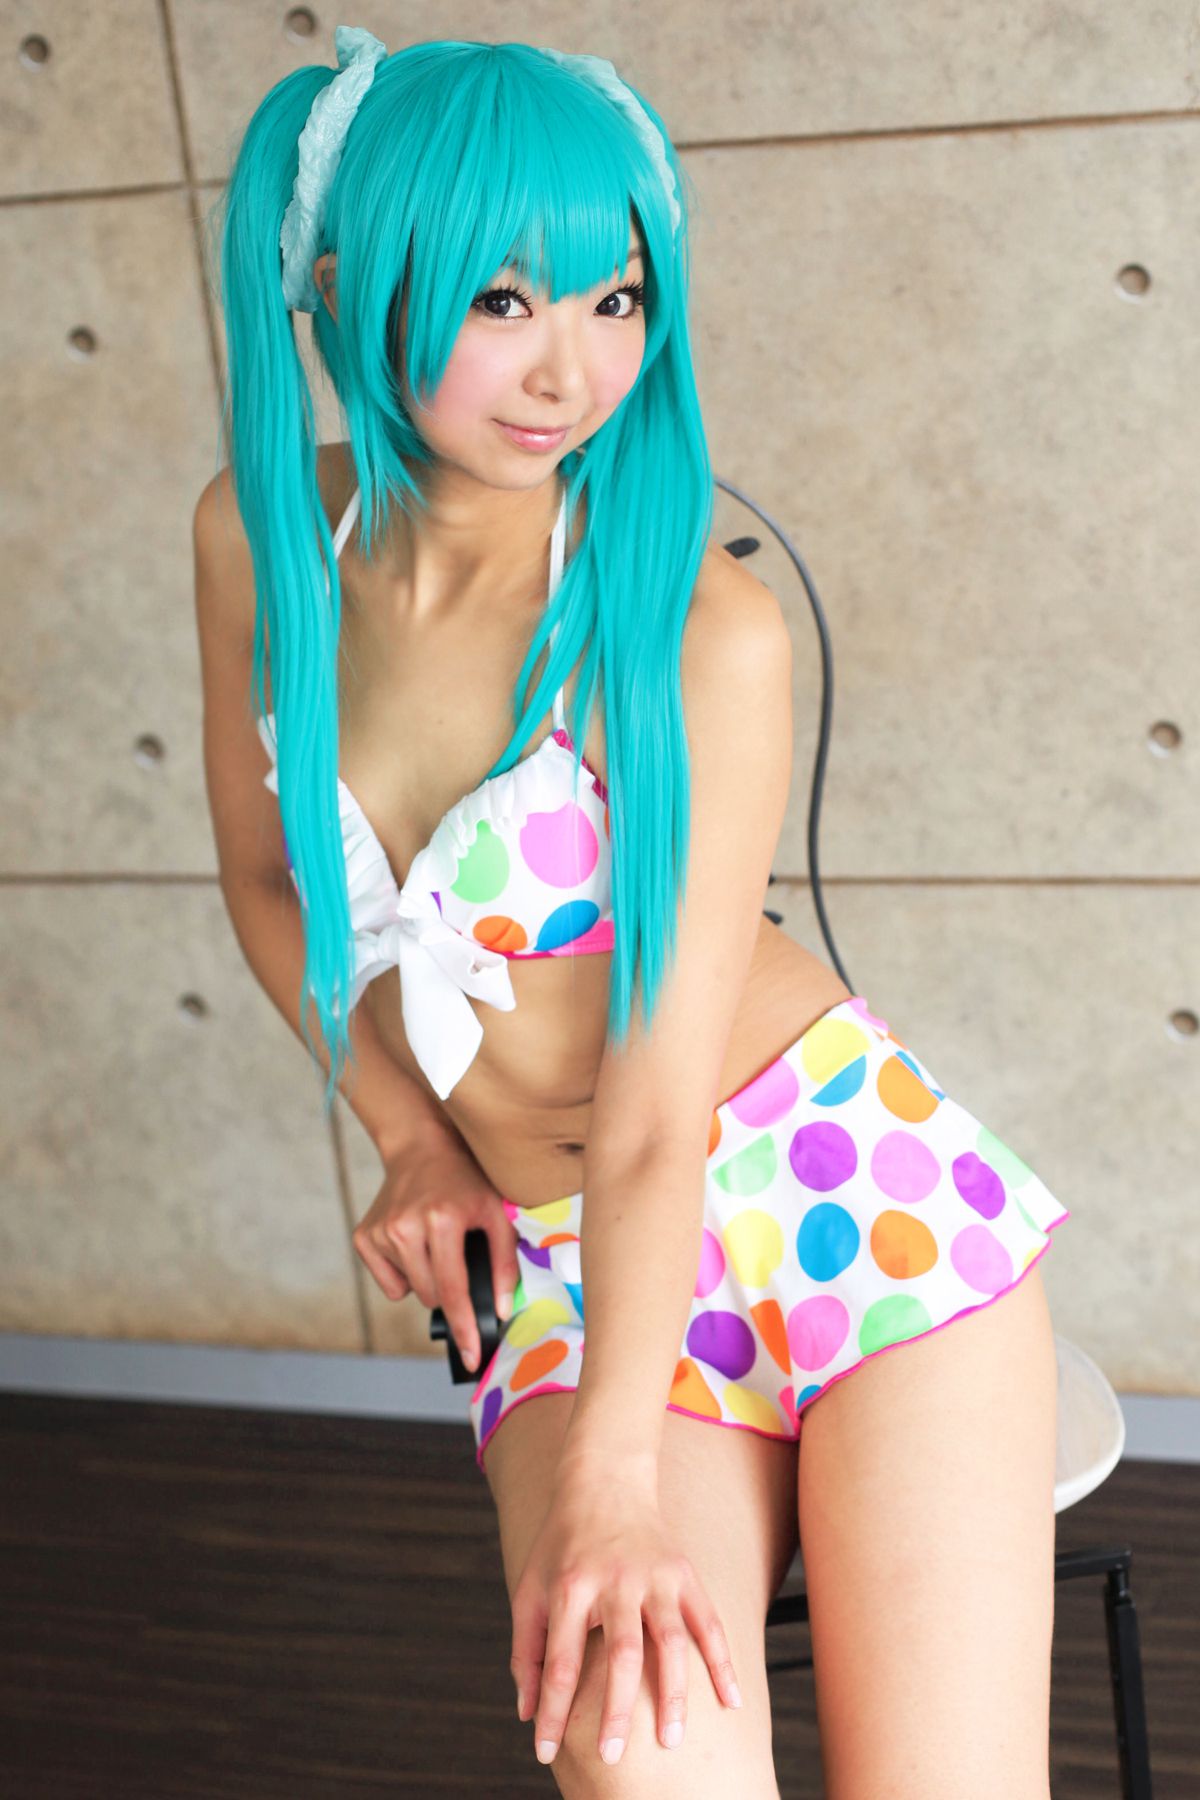 taotuhome[Cosplay] Necoco as Hatsune Miku from Vocaloid 套图第1张